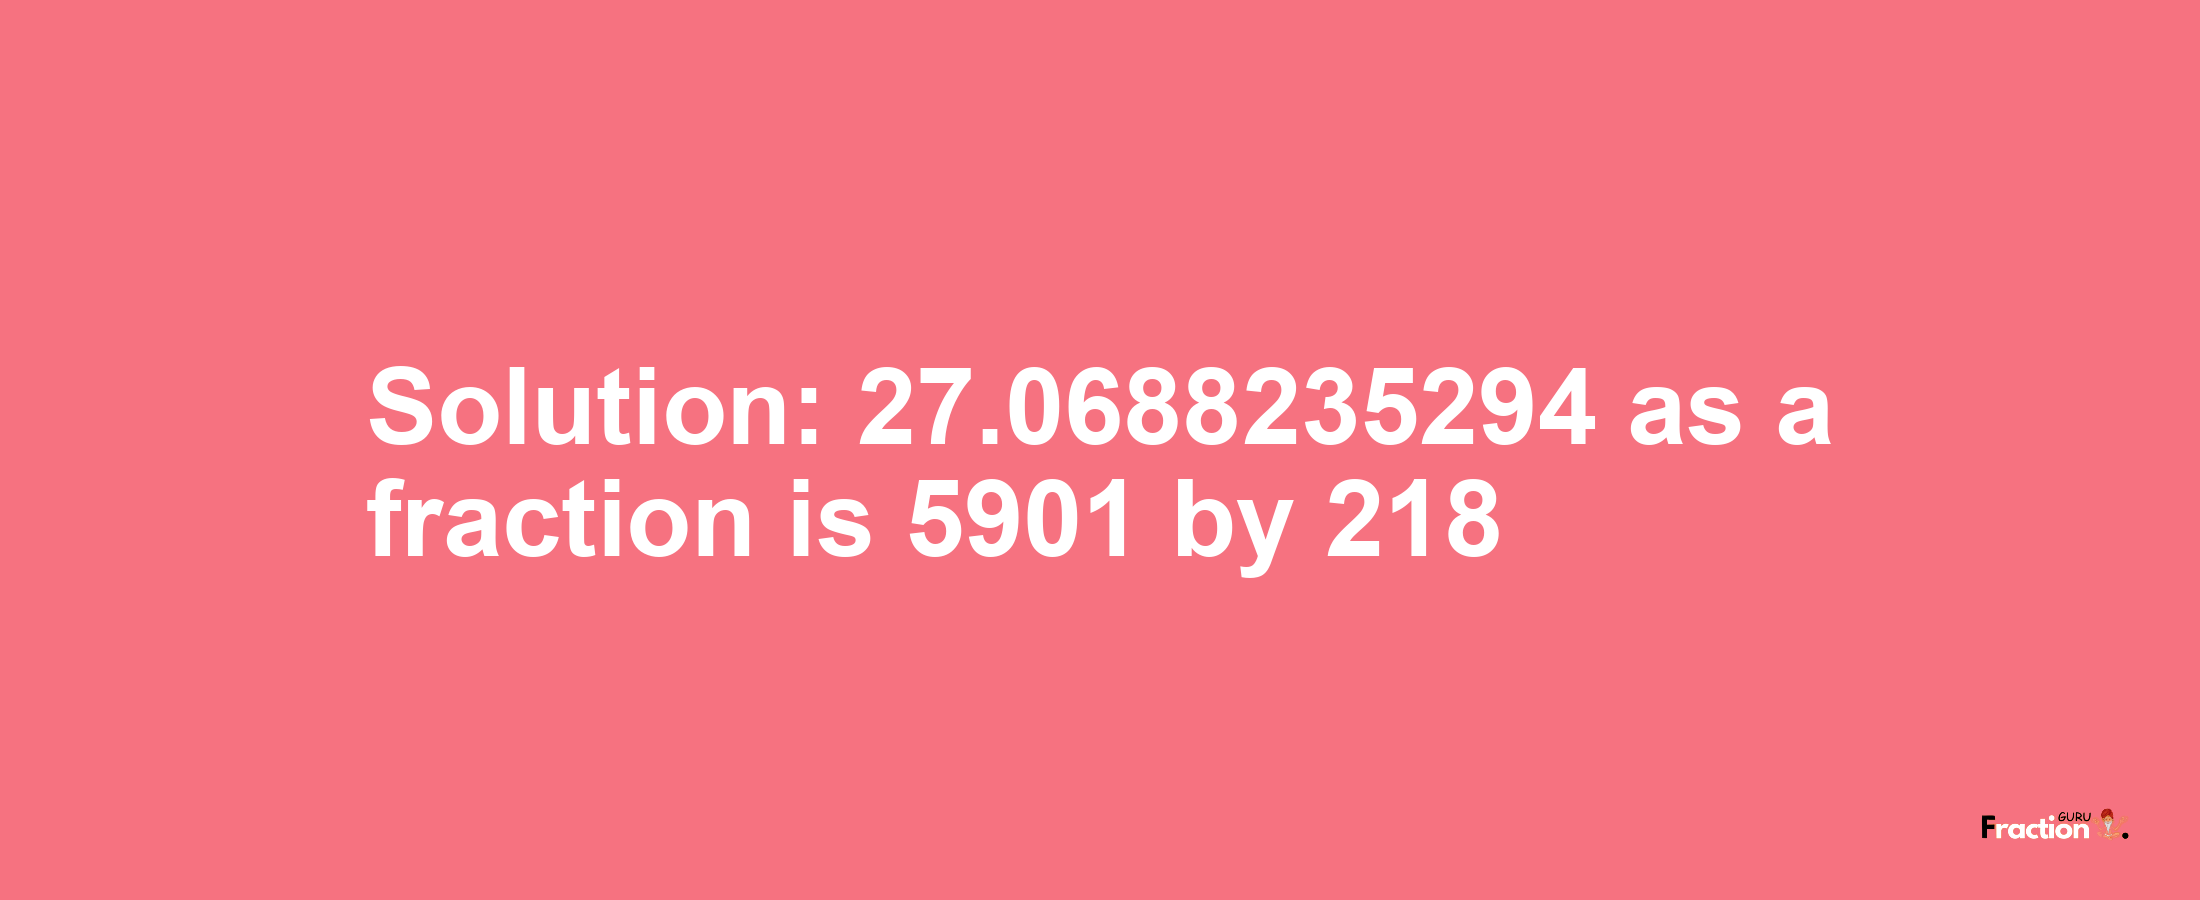 Solution:27.0688235294 as a fraction is 5901/218